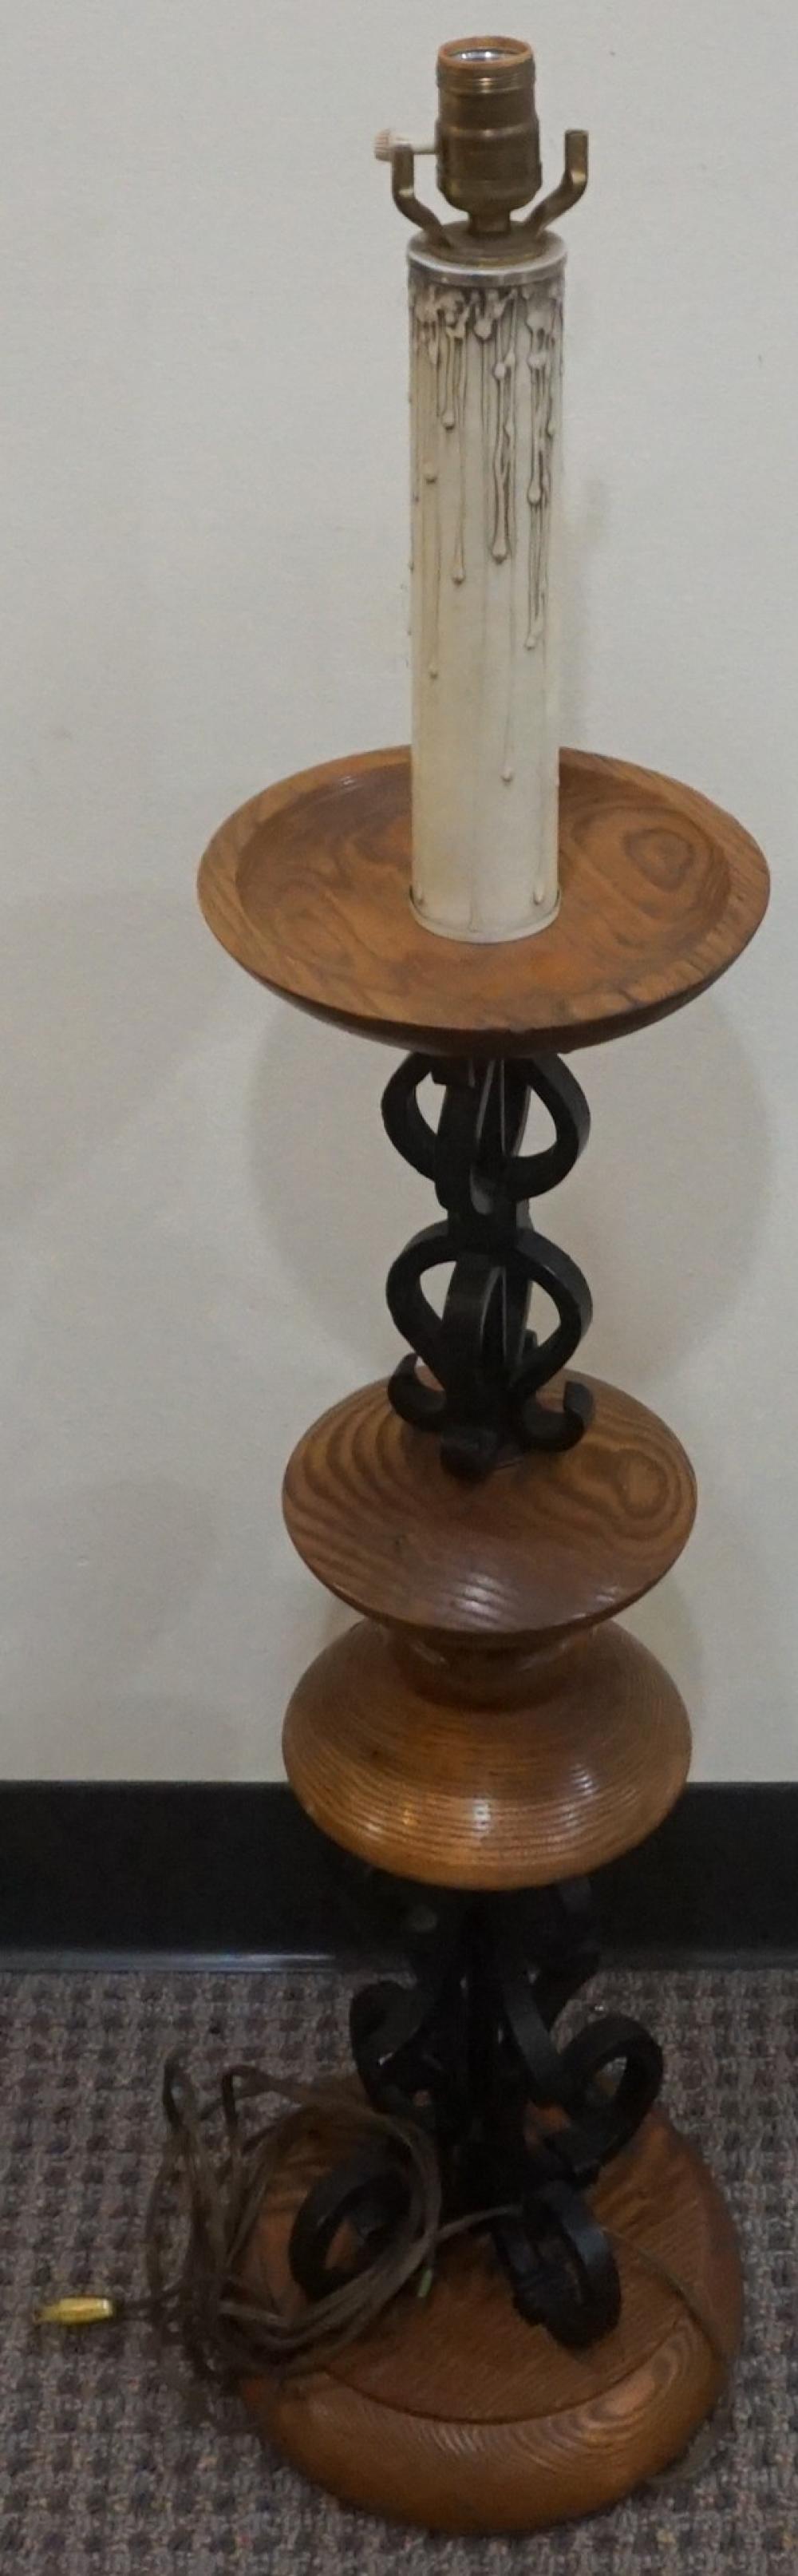 CANDLESTAND FORM METAL AND WOOD 330bf8